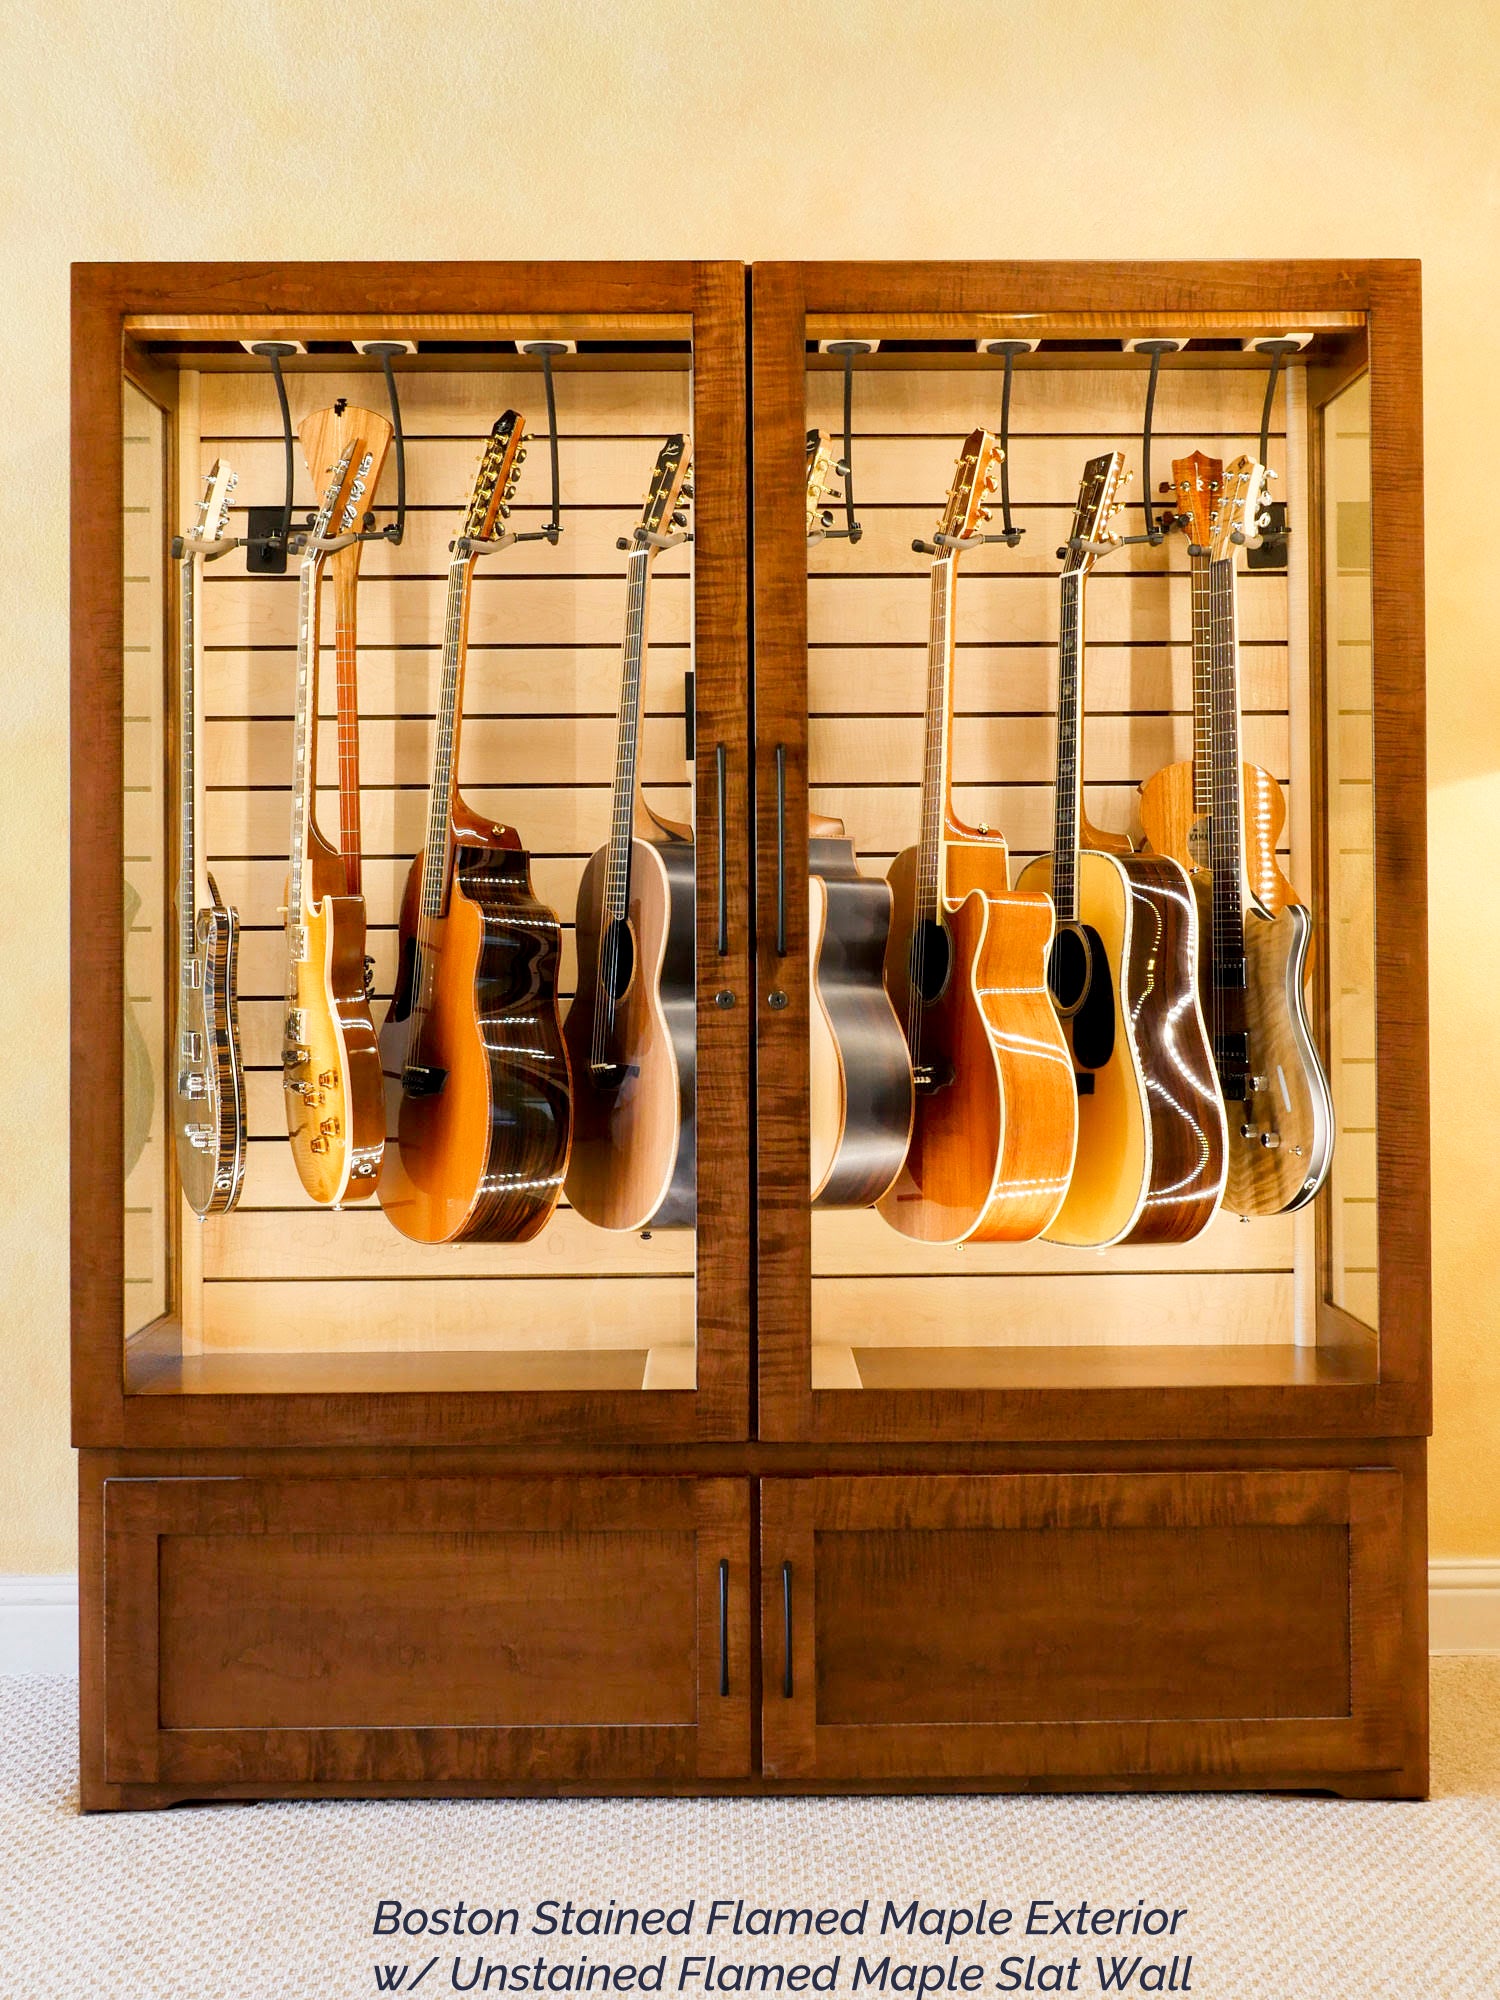 Multi-Instrument Humidified Guitar Display Cabinet